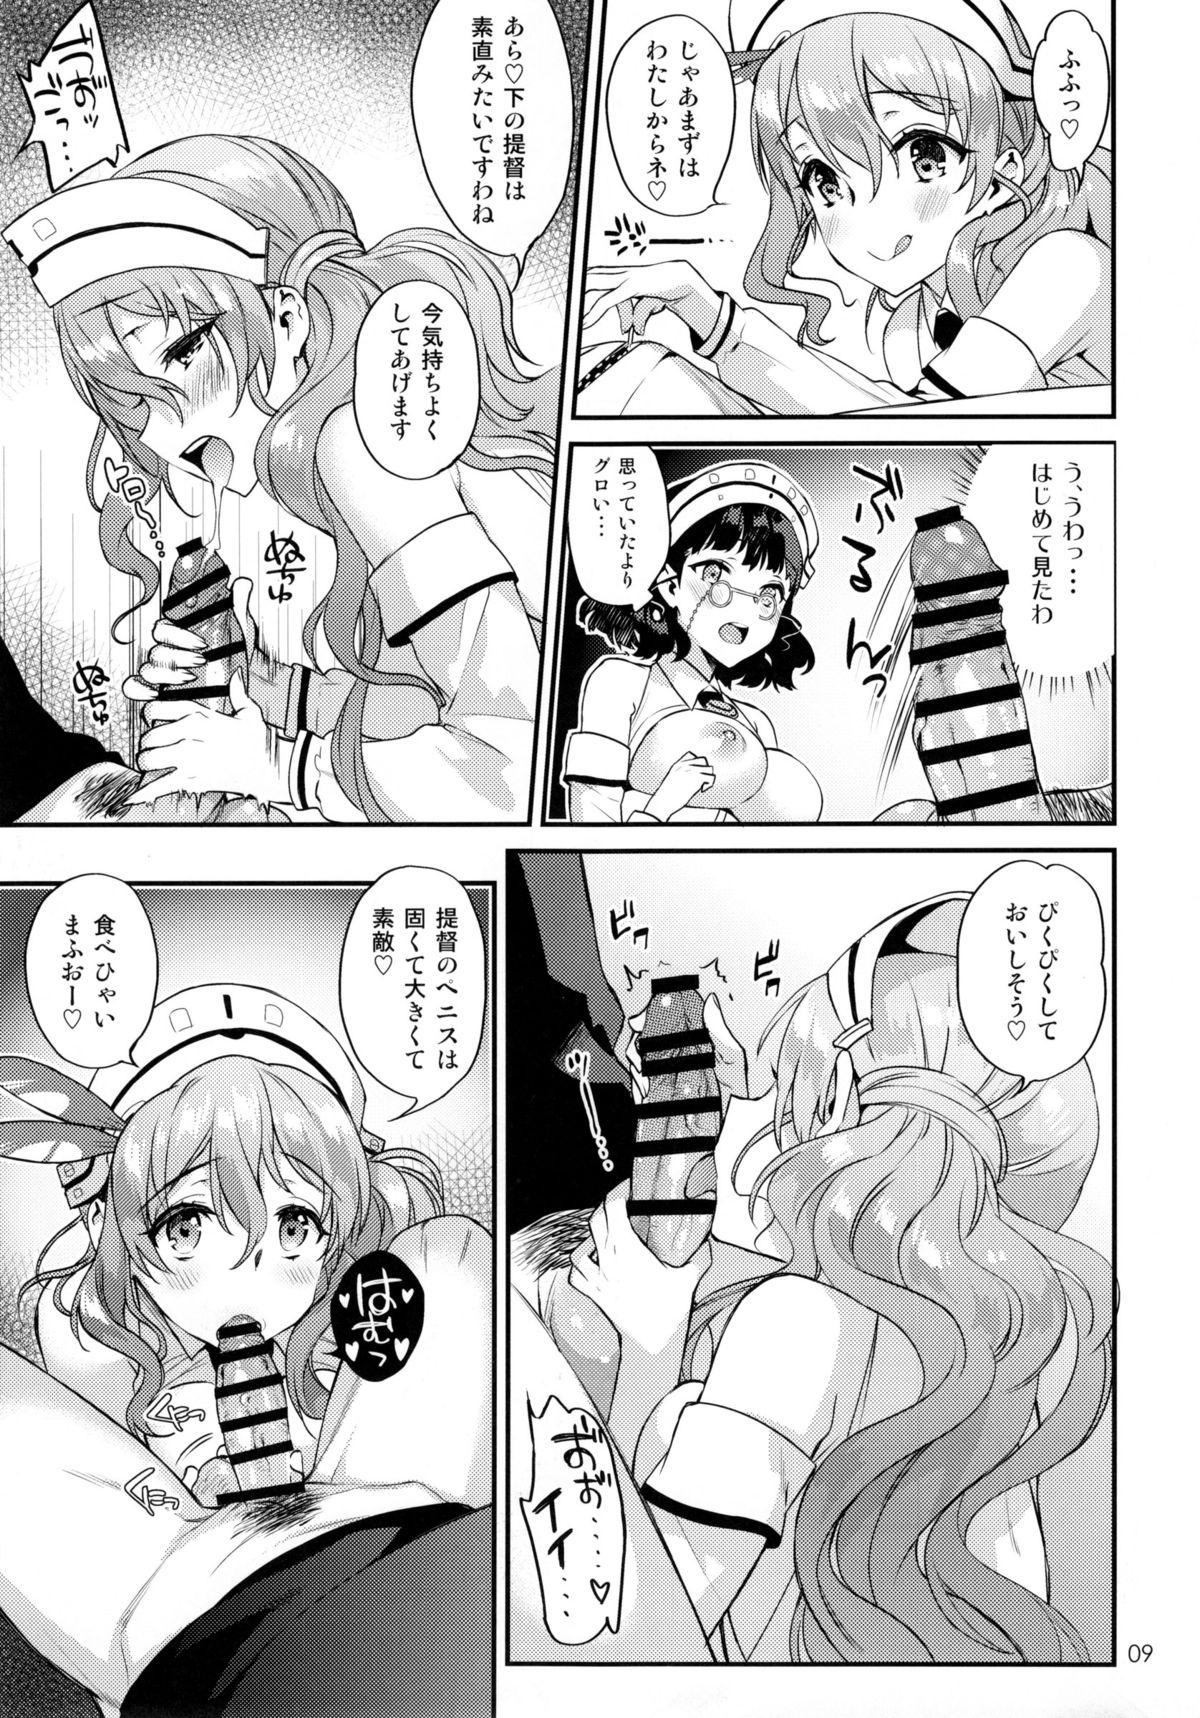 First Buon appetito ! - Kantai collection Extreme - Page 9